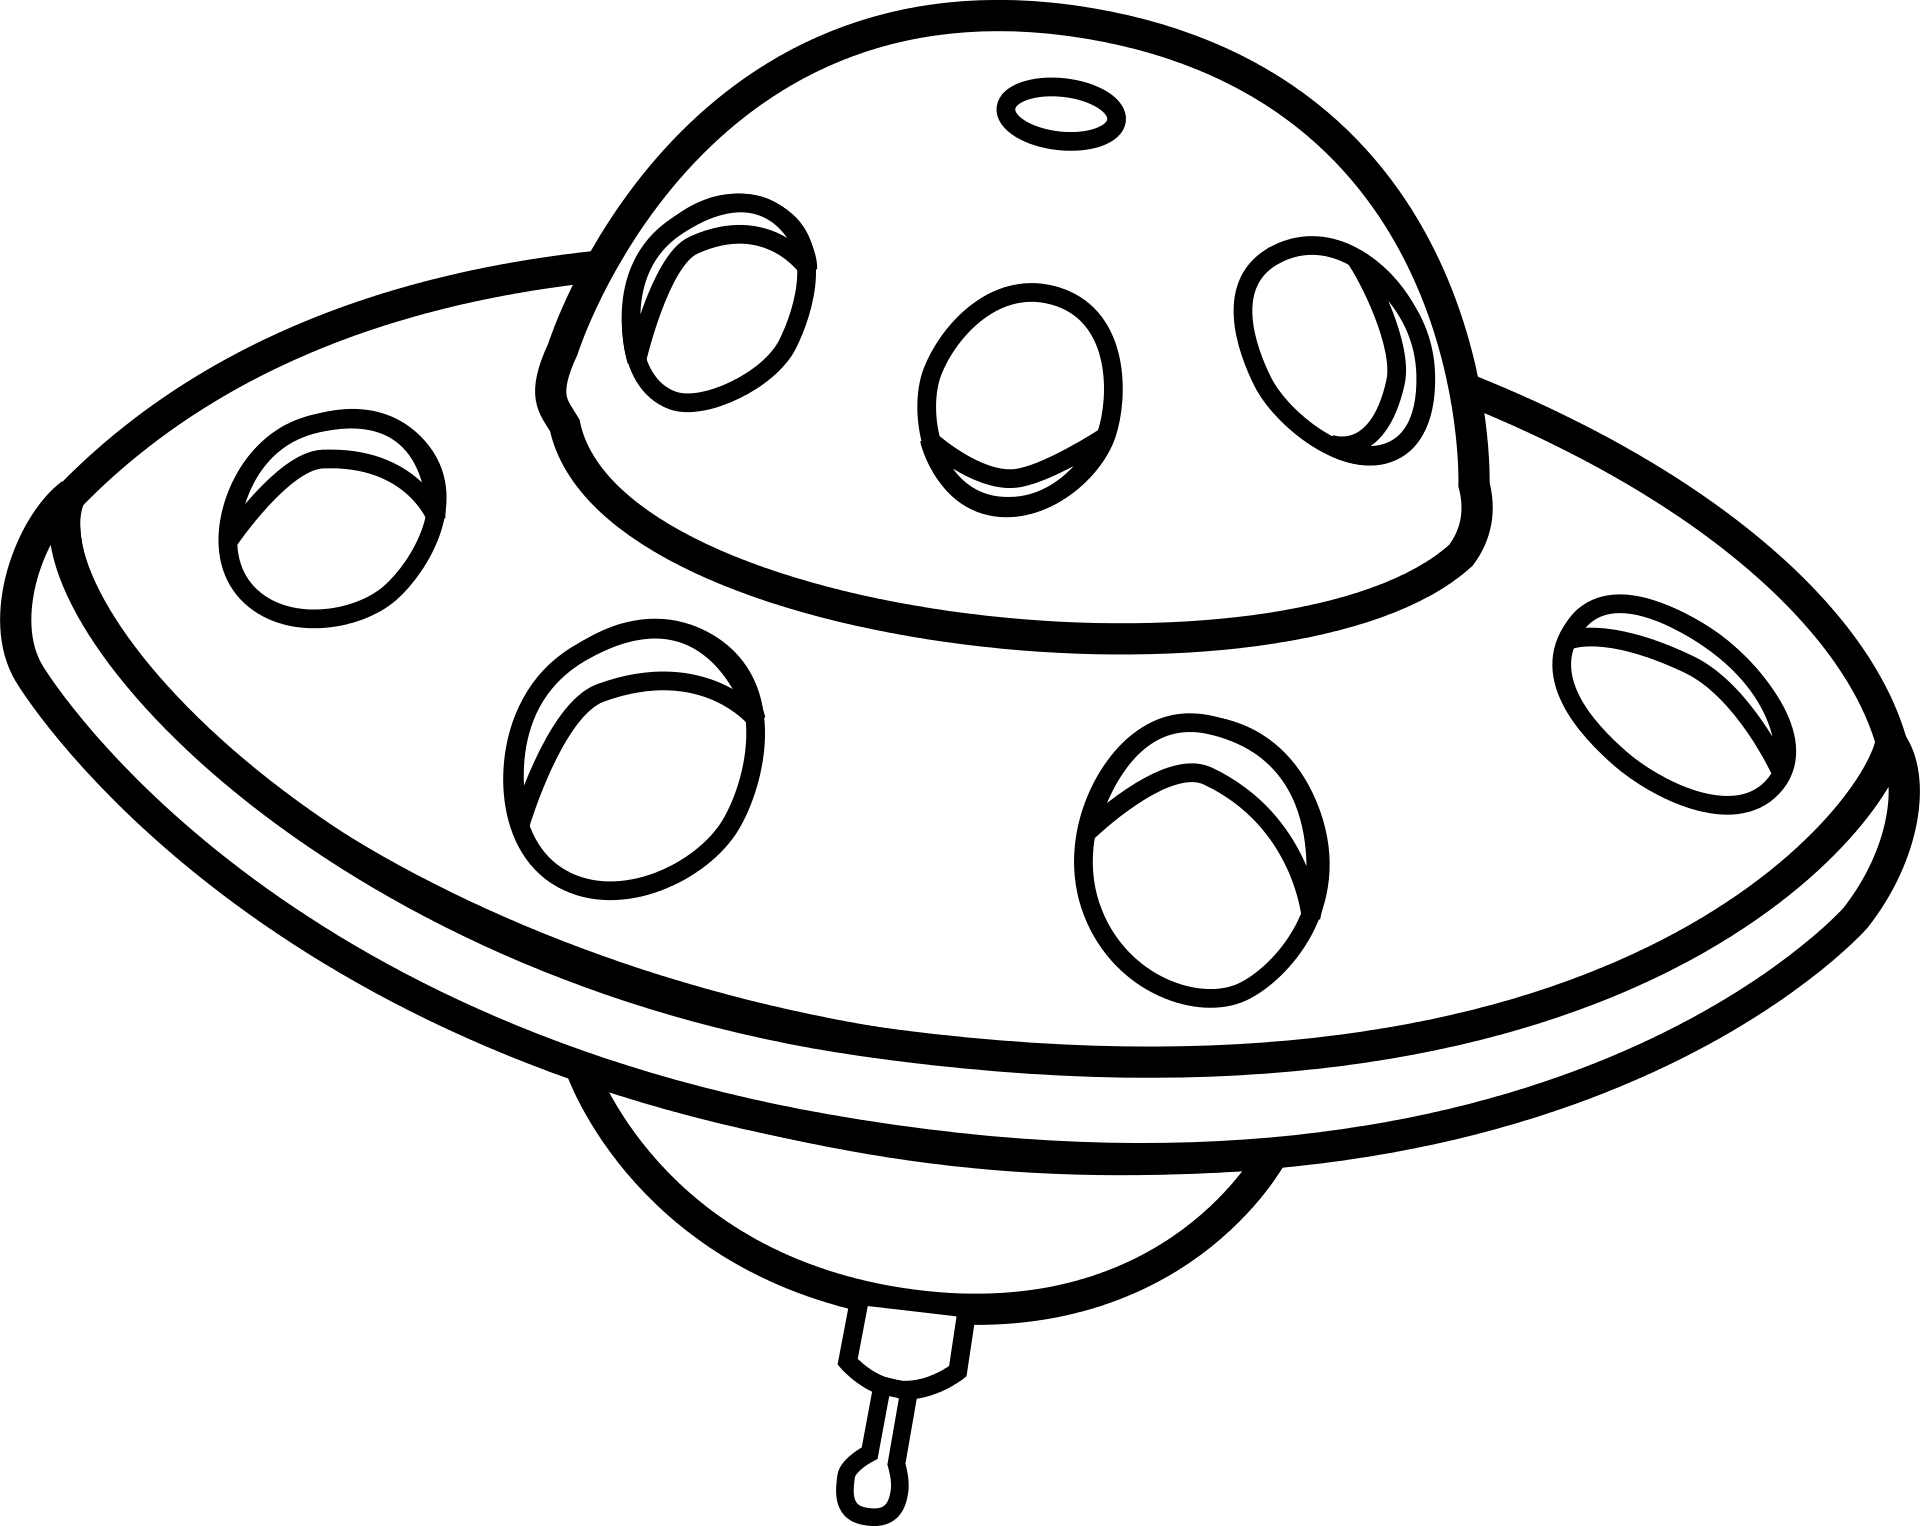 Ufo clipart black and white. Flying saucer unidentified object